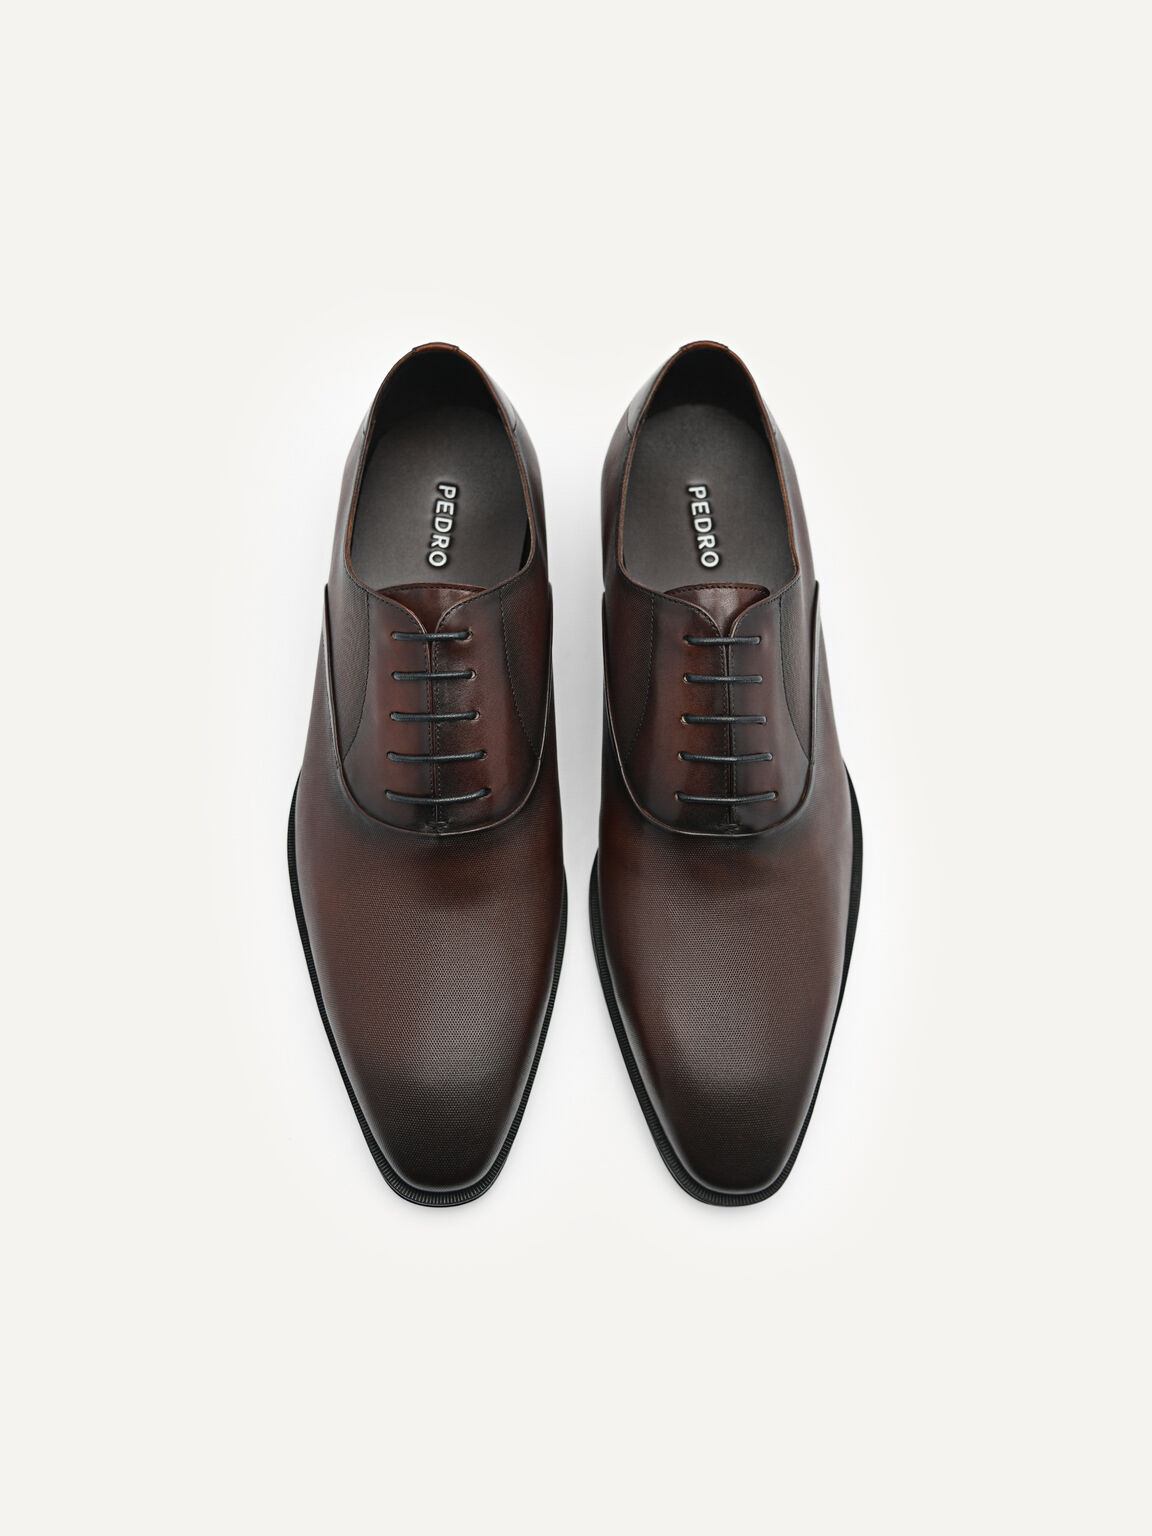 Holly Leather Oxford Shoes, Dark Brown, hi-res